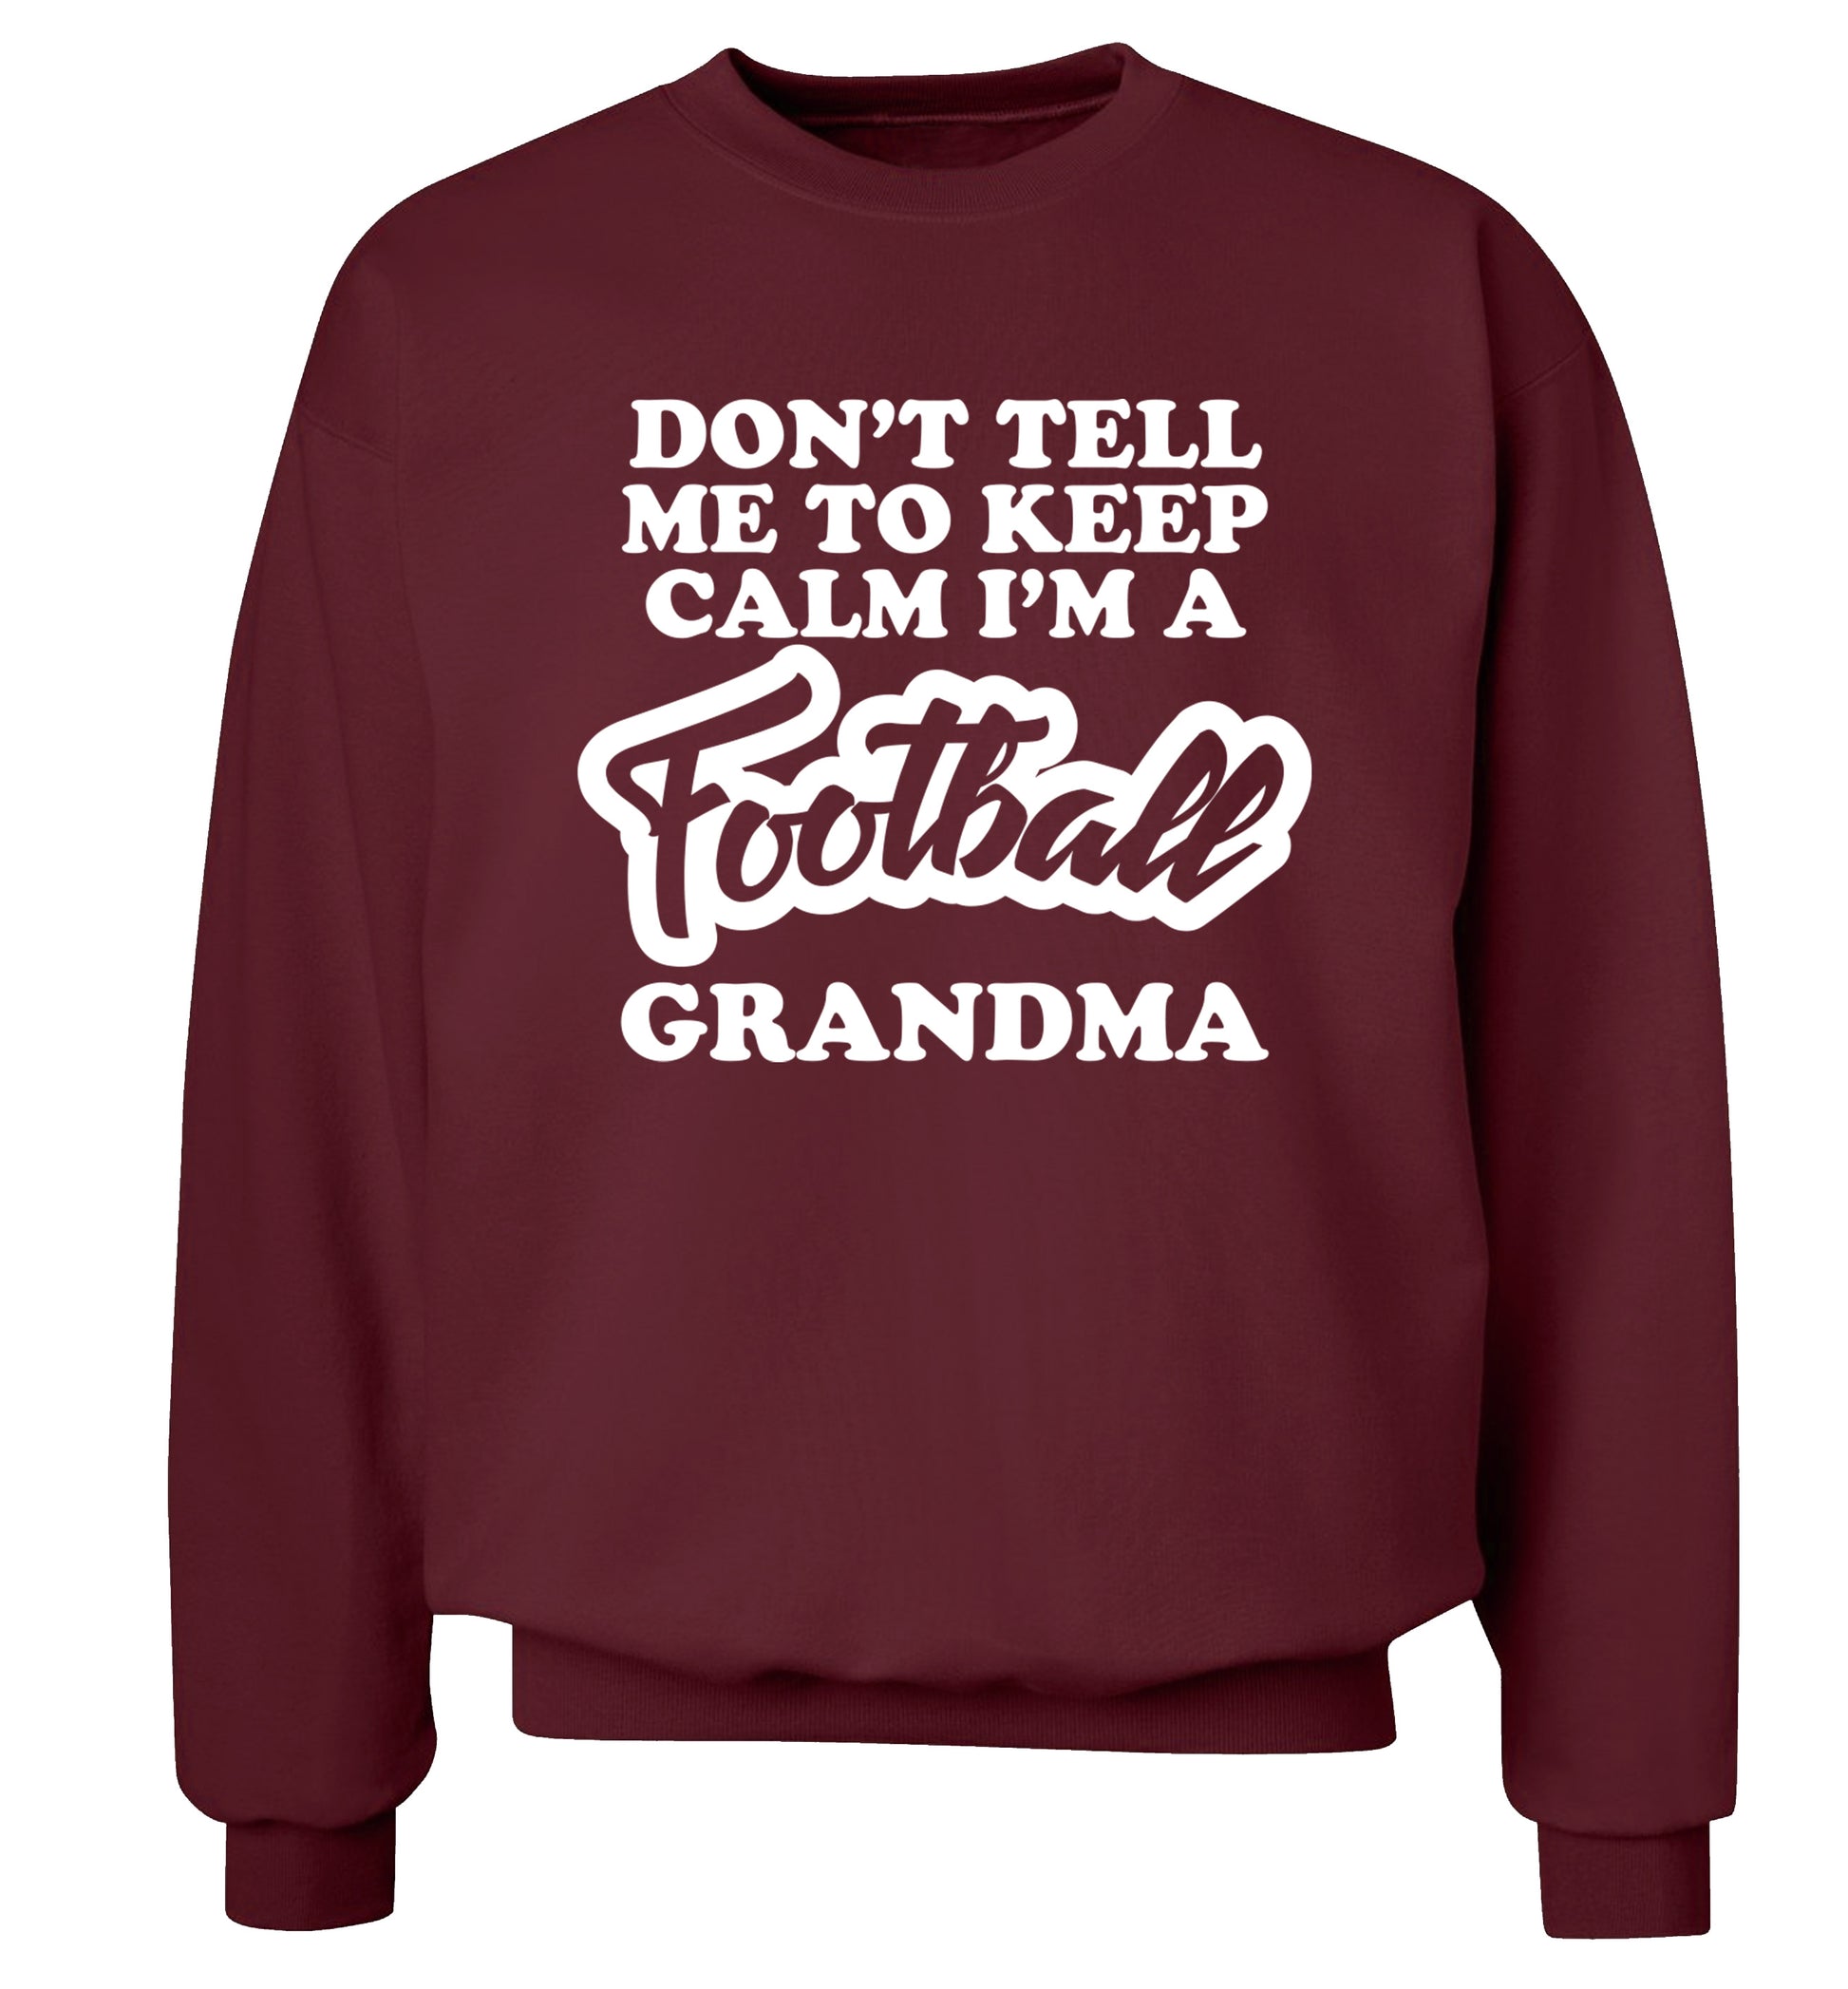 Don't tell me to keep calm I'm a football grandma Adult's unisexmaroon Sweater 2XL